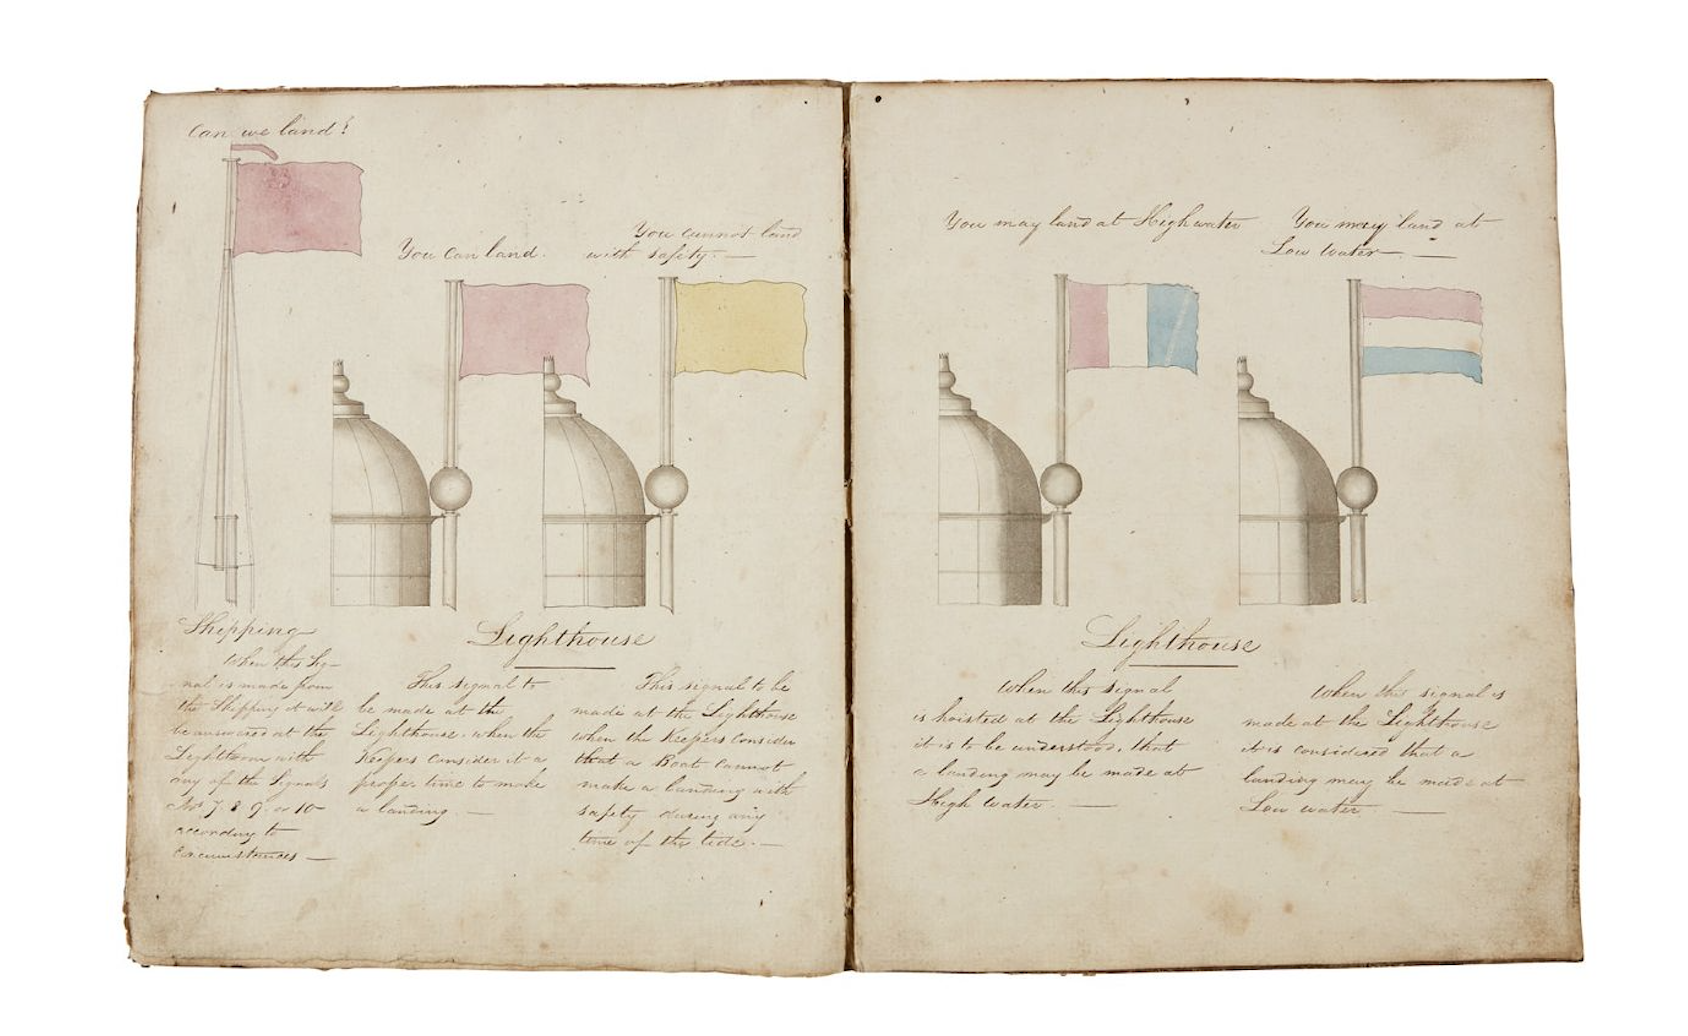 ‘Signals from the Bell Rock Lighthouse to the Arbroath Signal Tower’, a 19th-century manuscript estimated at £1,200-£1,800 ($1,525-$2,290) at Lyon & Turnbull.